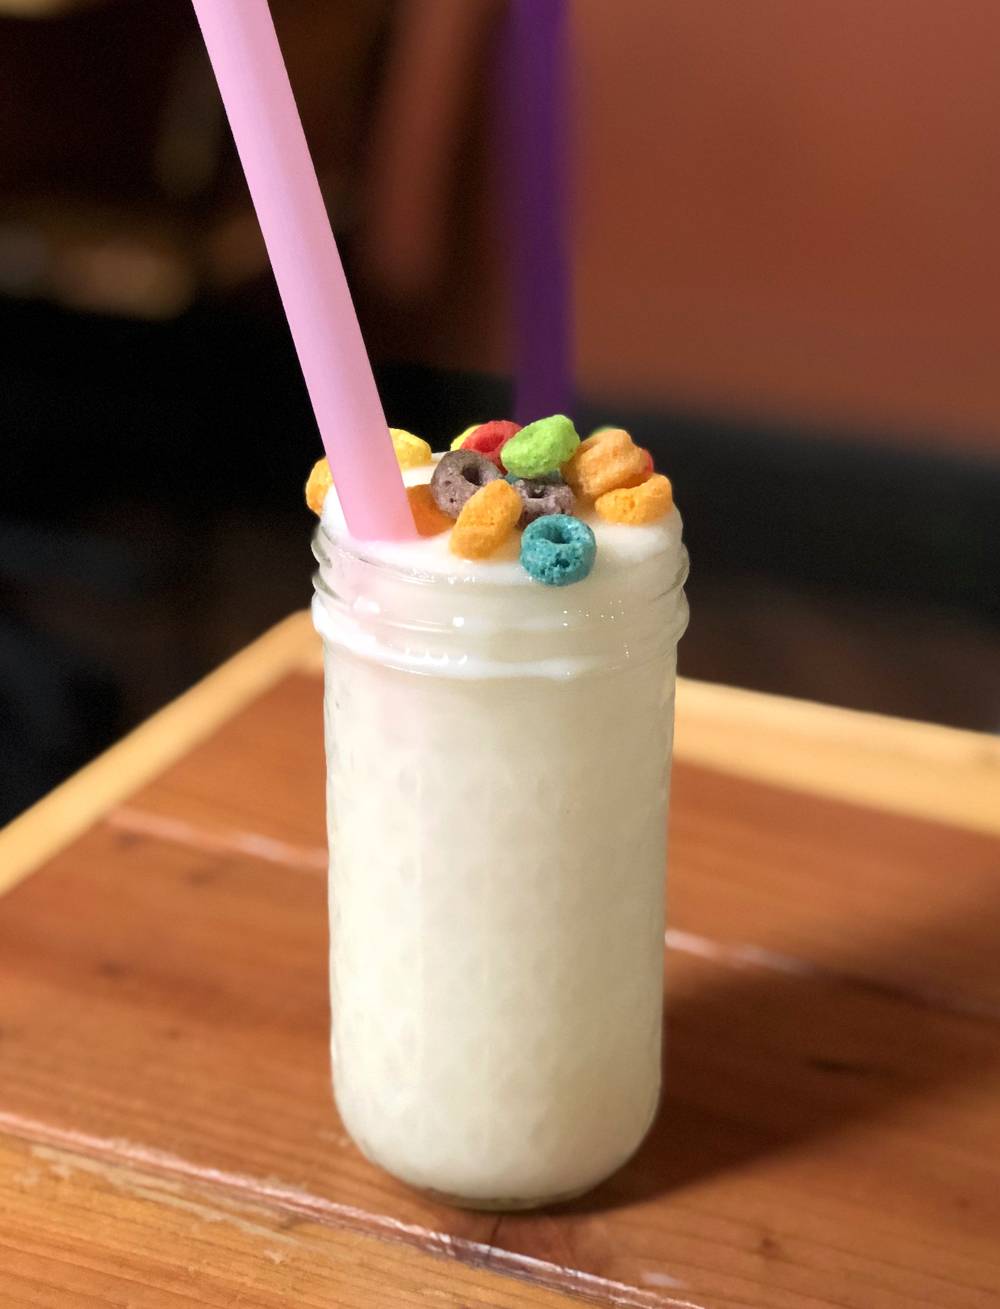 Image: Watson's Toucan Slam boozy slushie sits on a wood table. It is a frozen, blended white beverage served in a mason jar and garnished with Froot Loopsâ„¢ cereal pieces. A pink straw and a purple straw stick out of the drink on opposite sides of the glass. The glass is on a wood table. Photo by Jessica Hammie.